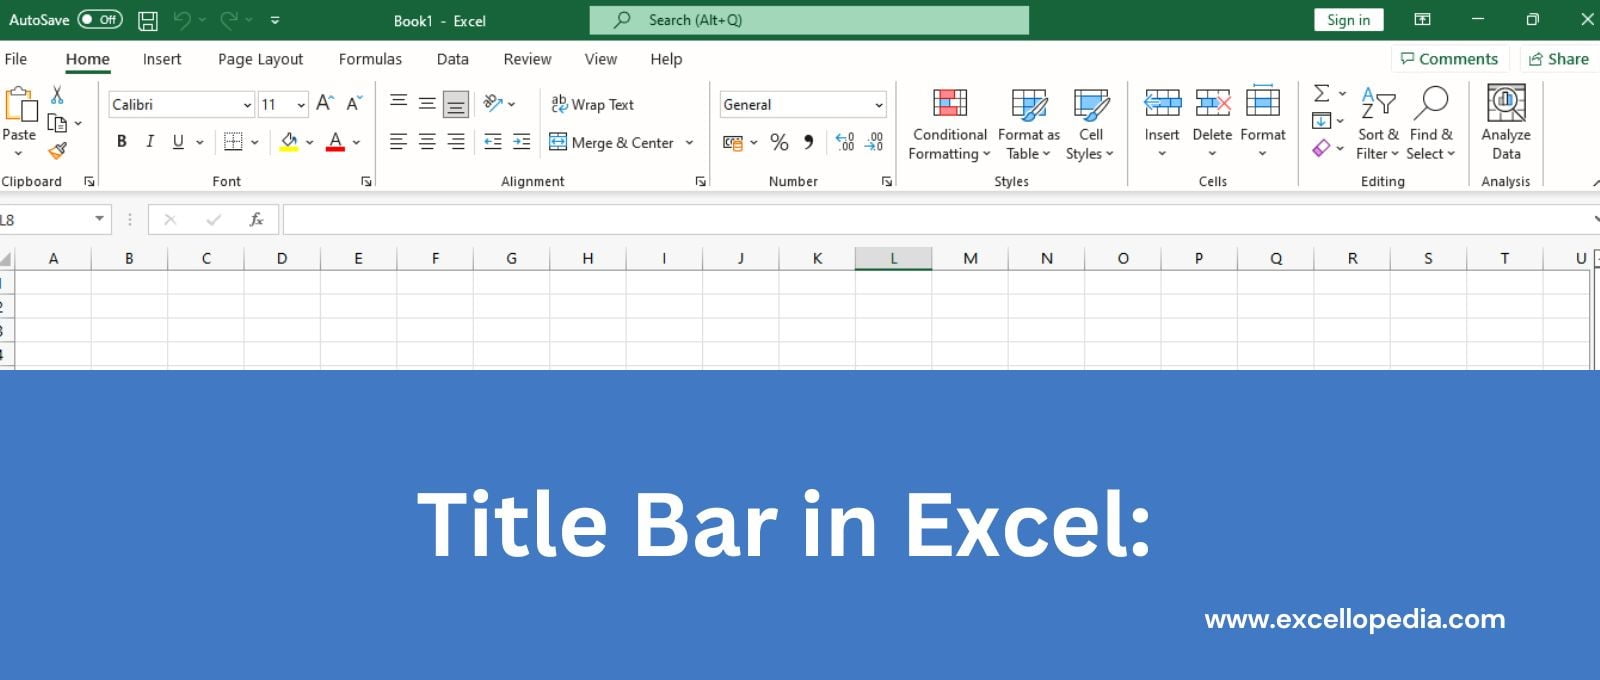 Title Bar in Excel